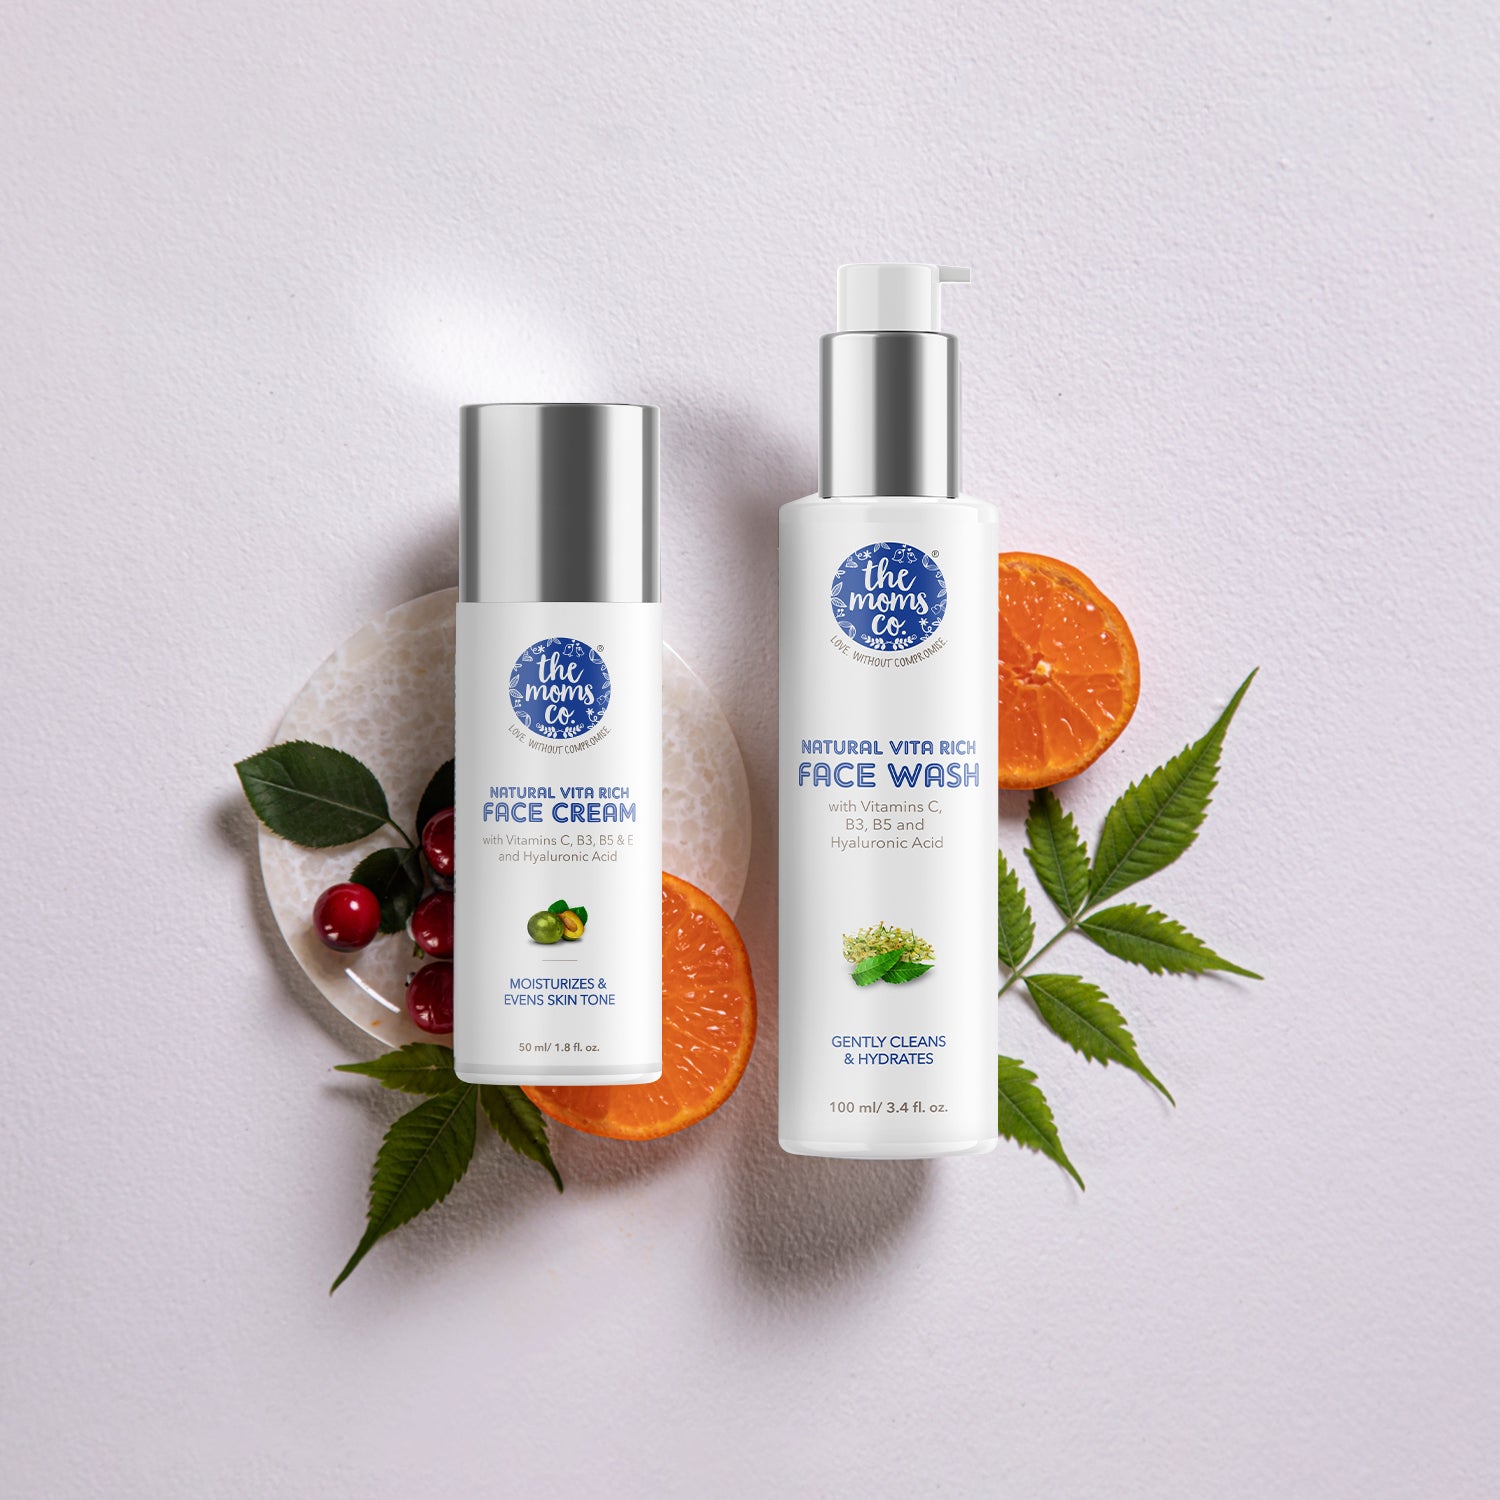 The Moms Co Daily Vita Rich Hydration Bundle | Face Cream + Face Wash